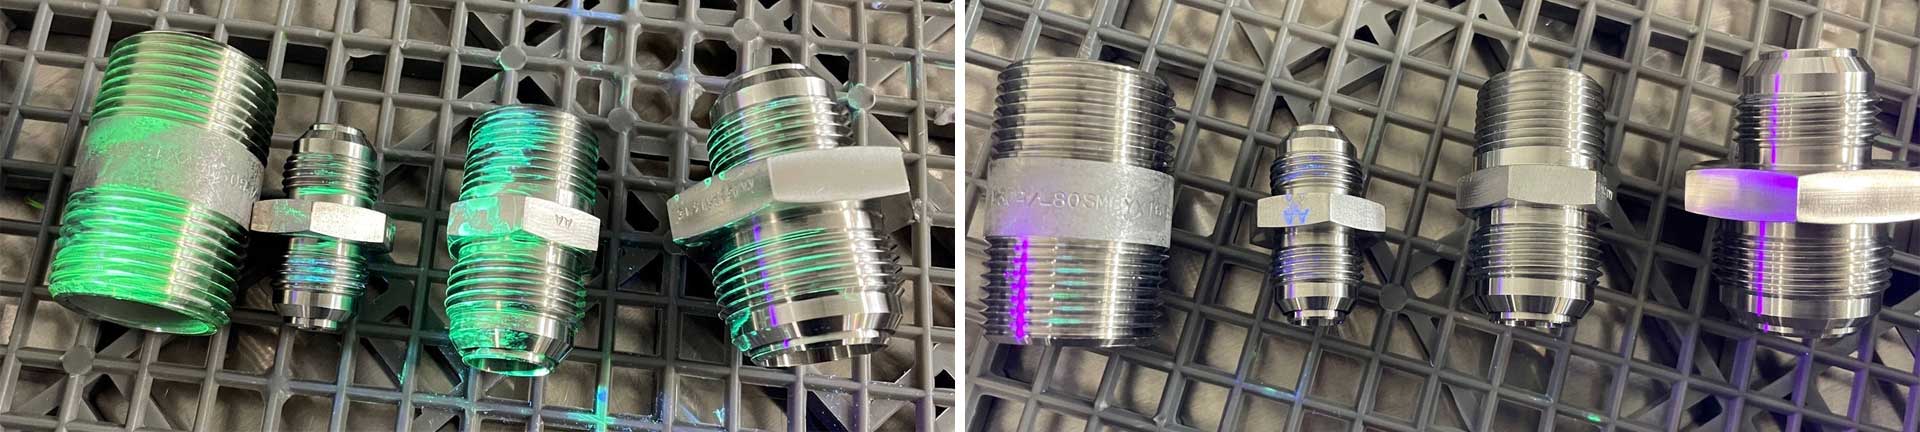 316 SS Fittings with dye penetrant (no water rinse) baked on. Same fittings after Rocket flush solvent cleaning 20 minutes (no water rinse) exposed to UV light to show residue. 